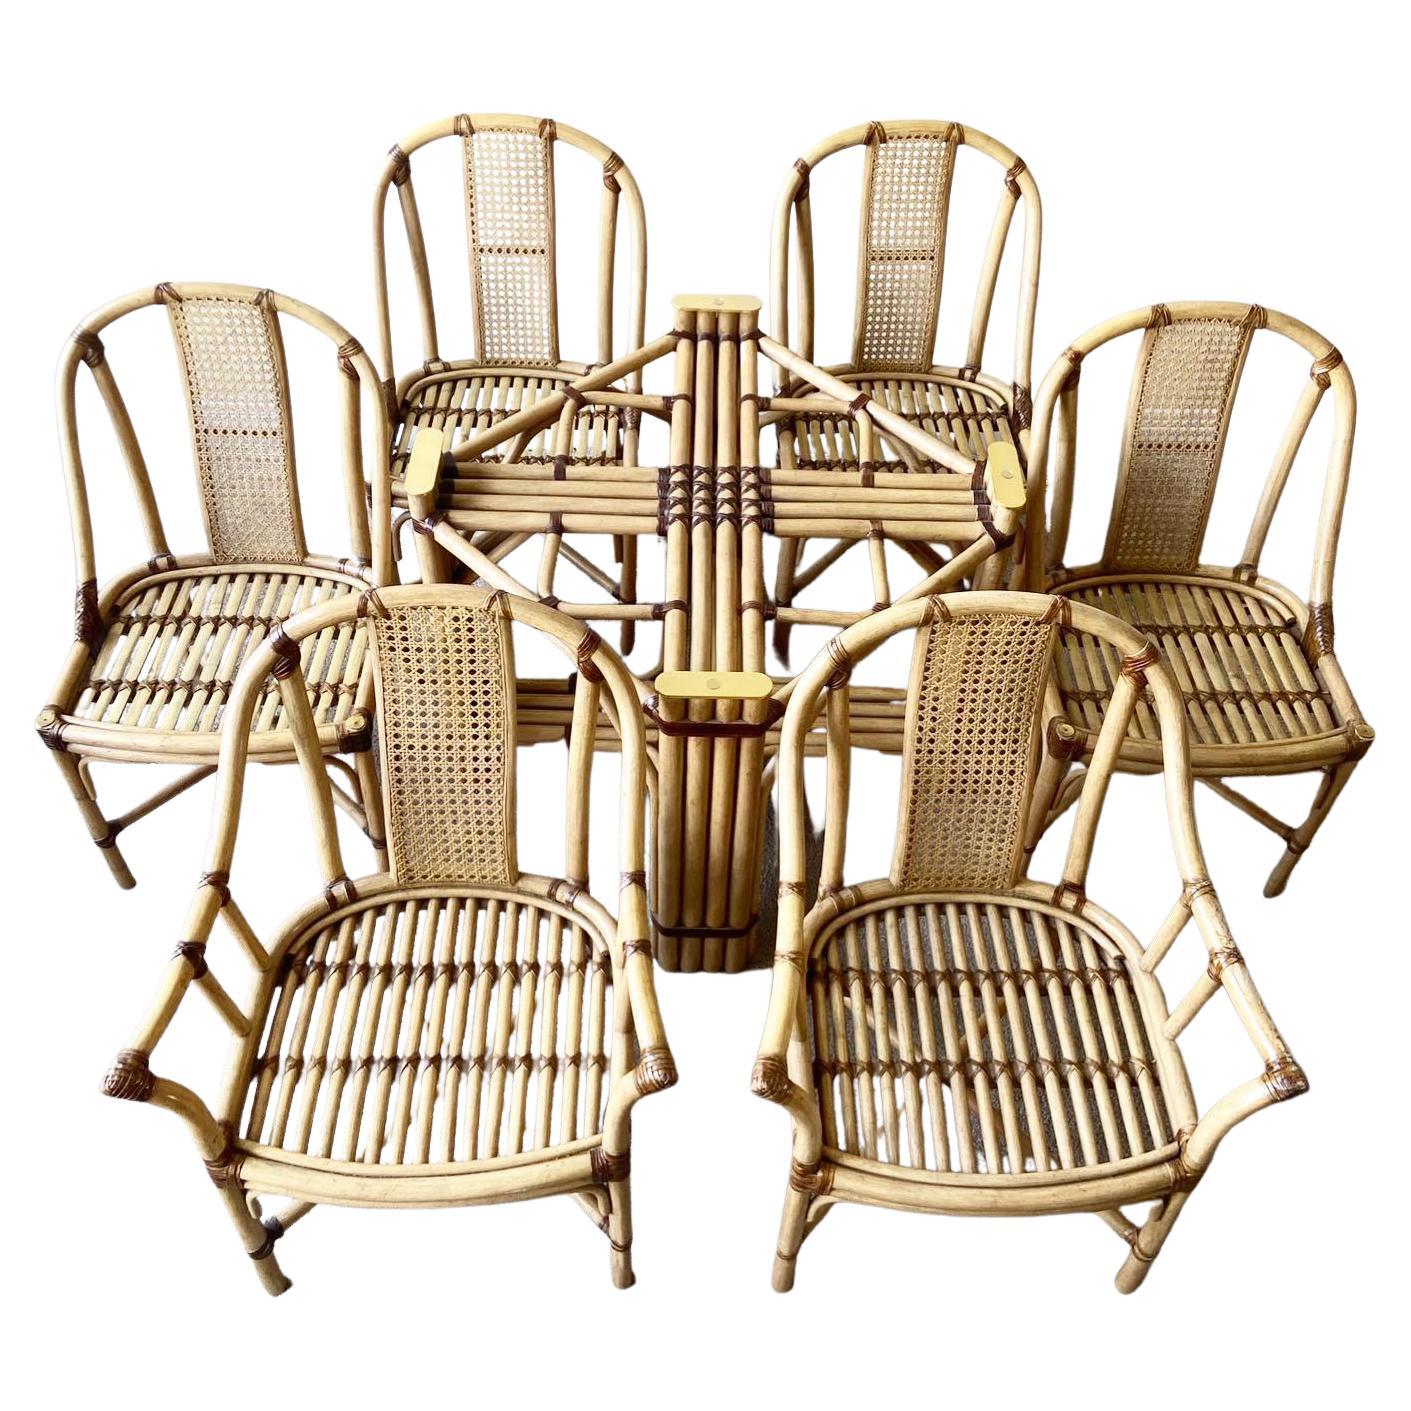 Drexel Heritage Bamboo Rattan and Cane Dining Set, 7 Pieces